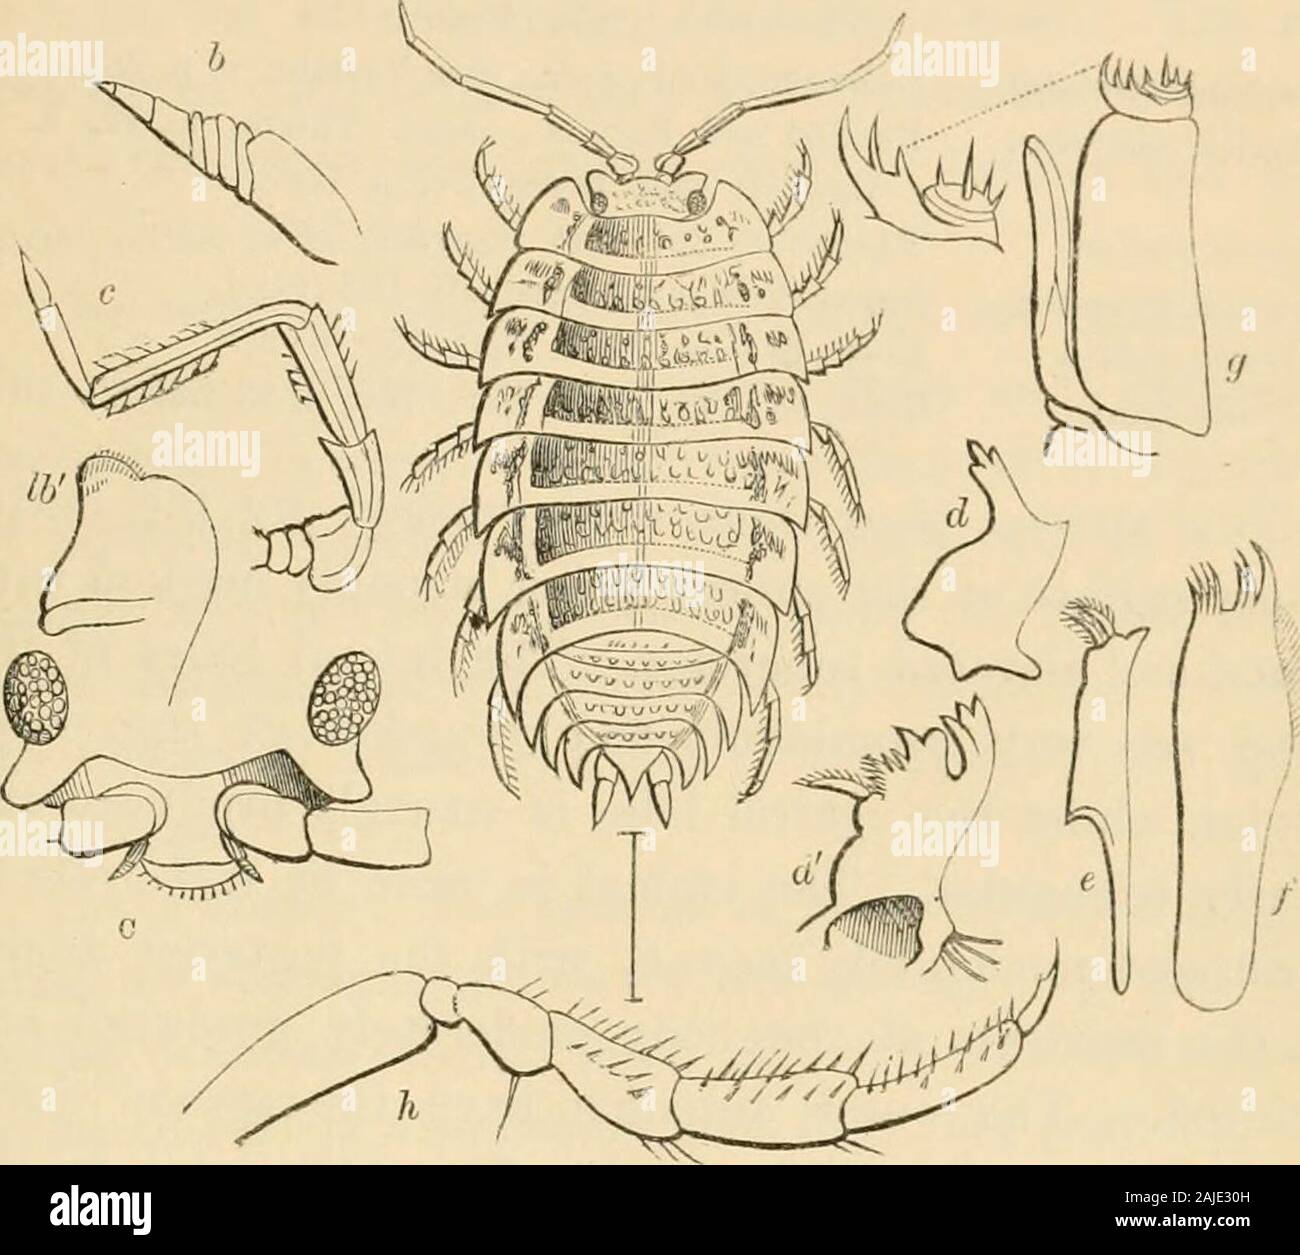 A history of the British sessile-eyed Crustacea . , though sometimesbadly marked (Porcellio pruinosus, Br.—P. frontalis Lereb.,not Edw., for example), is present in all the species Ihave had an opportunity of examining. 474 ONISCIDiE. The inner antennae are very minute and four-jointed,the second joint in some of the species appearing to beformed of several minute rings. The outer antennae areseven-jointed, the basal joint also occasionally appearingas if formed of two portions. The base of the secondjoint is dilated ; the fifth joint is long and somewhatslender, being considerably longer than Stock Photo